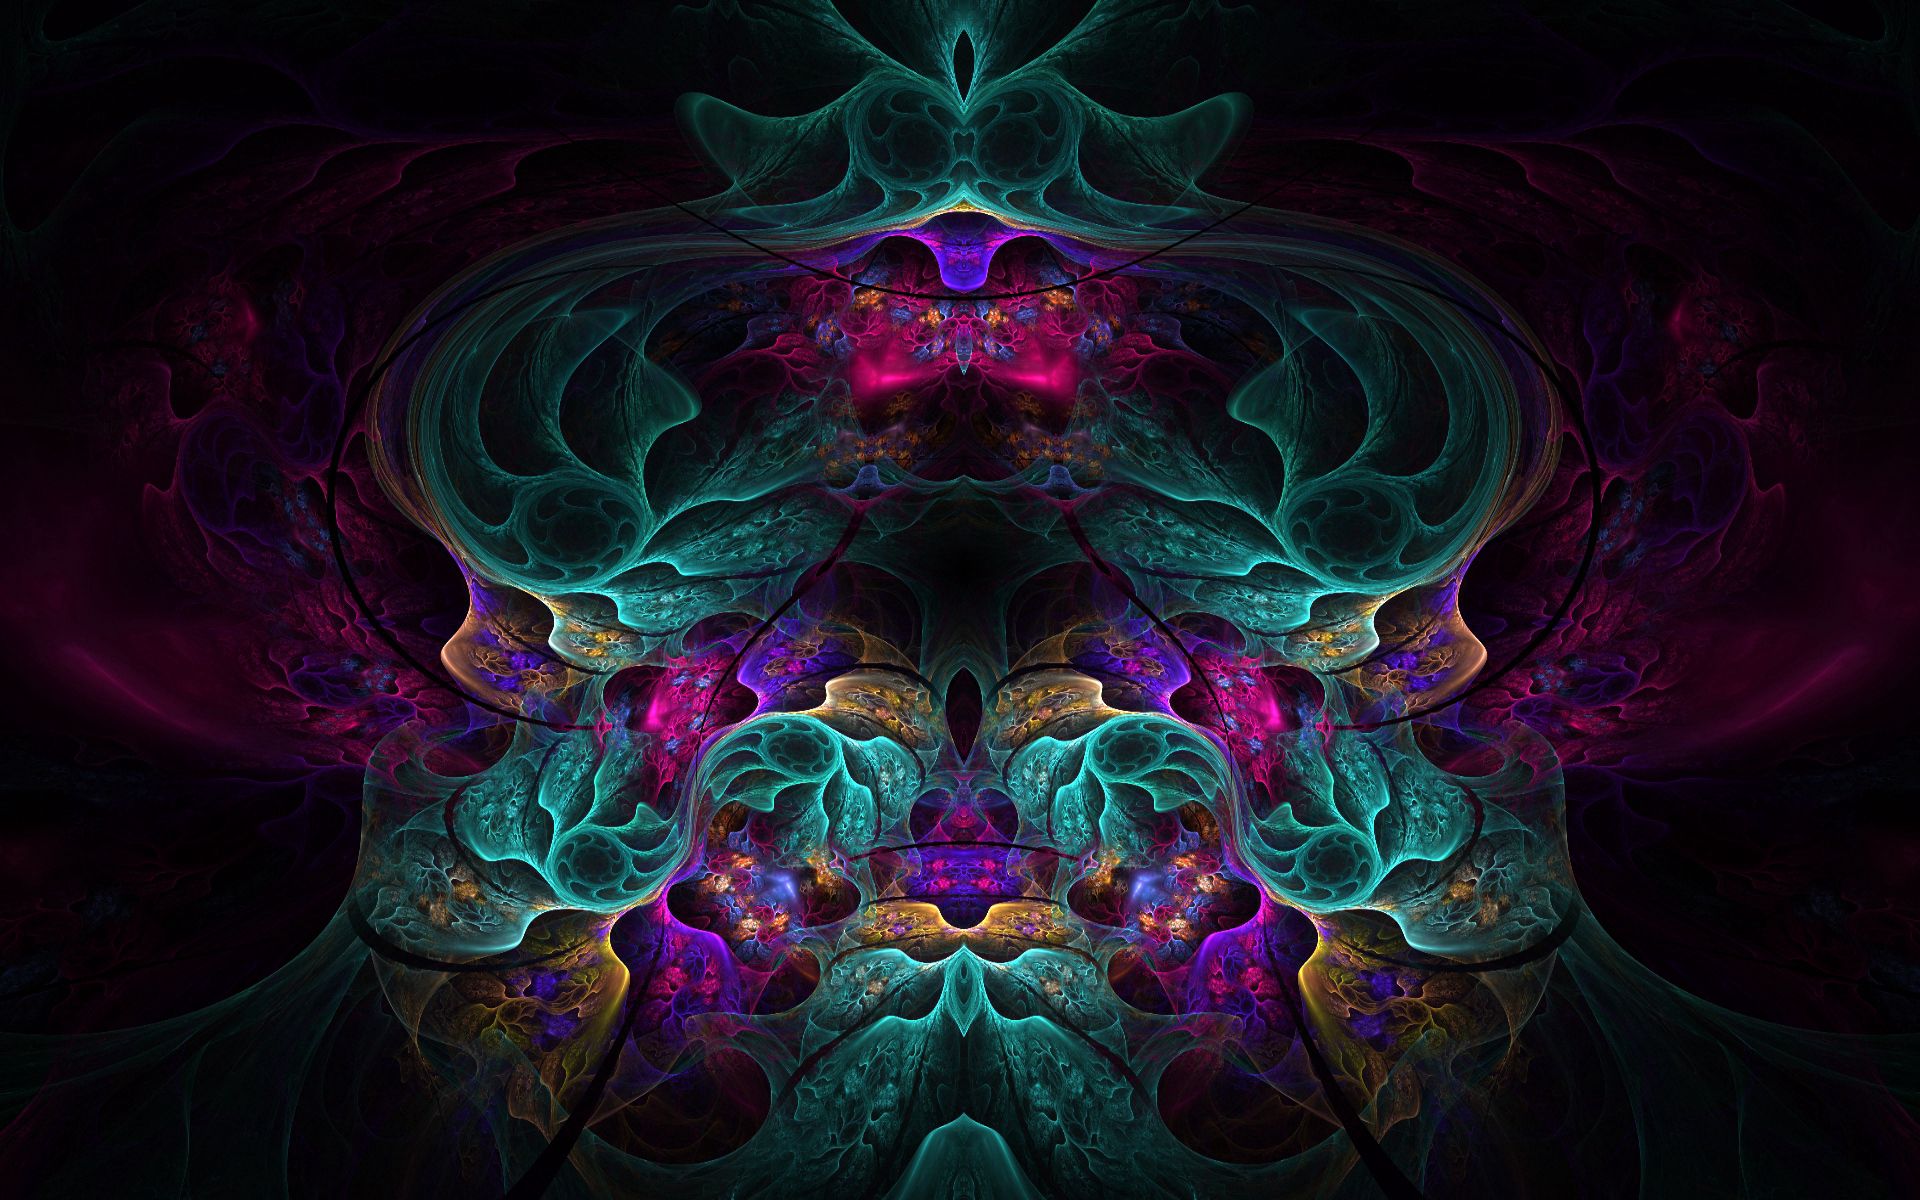 121959 free wallpaper 320x480 for phone, download images fractal, patterns, flowers, colorful 320x480 for mobile